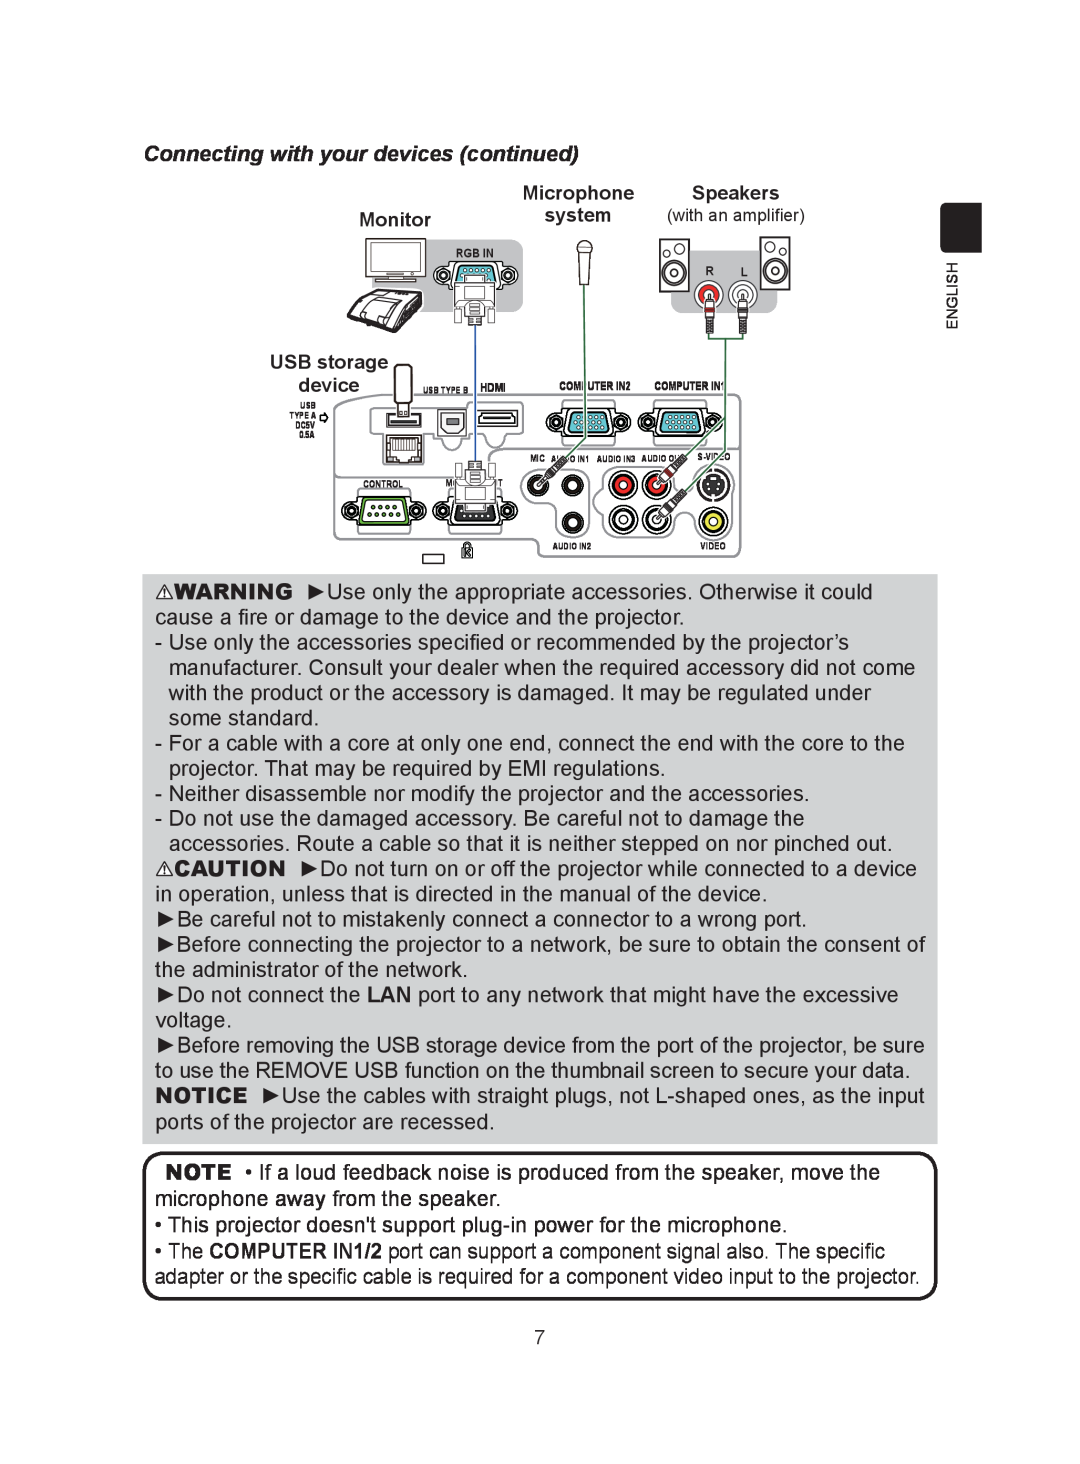 Hitachi CP-A300N user manual Connecting with your devices continued 